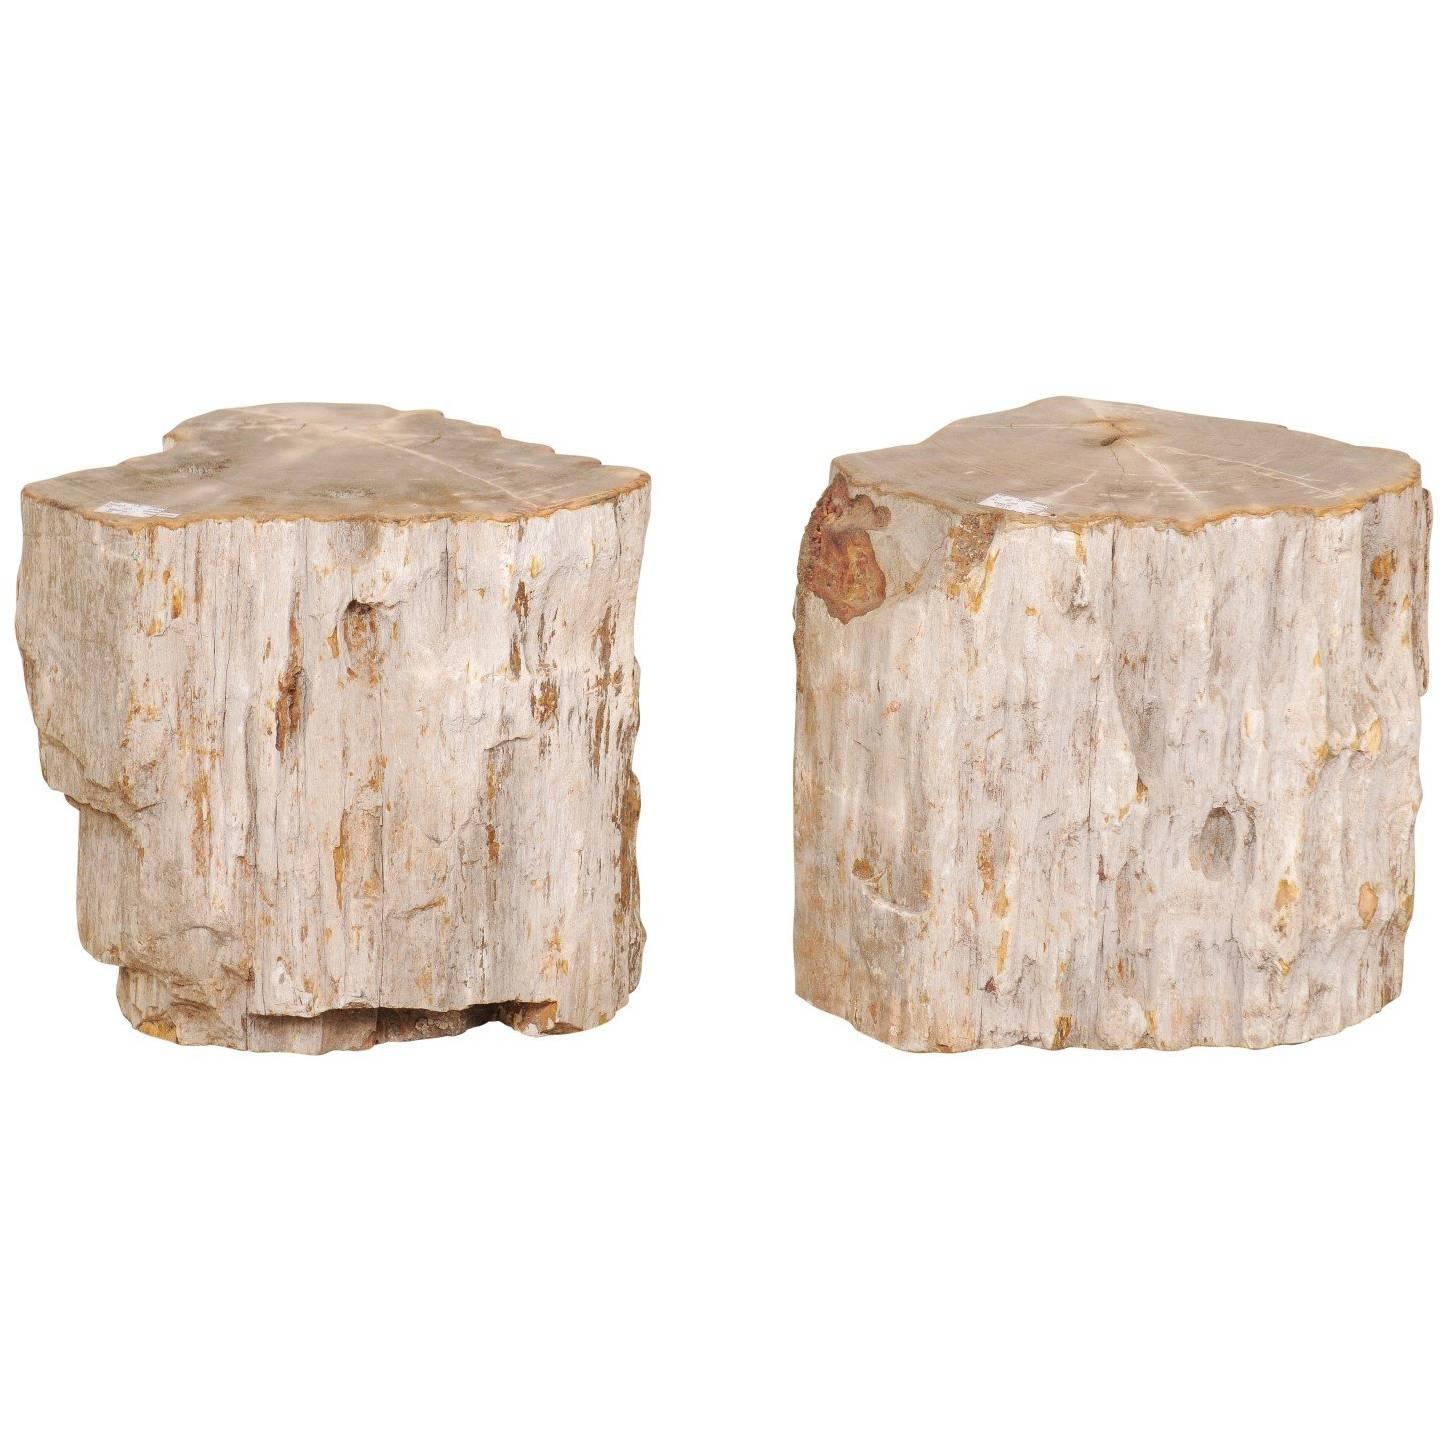 Pair of Light Toned Cream Colored Petrified Wood Side or Drink Tables